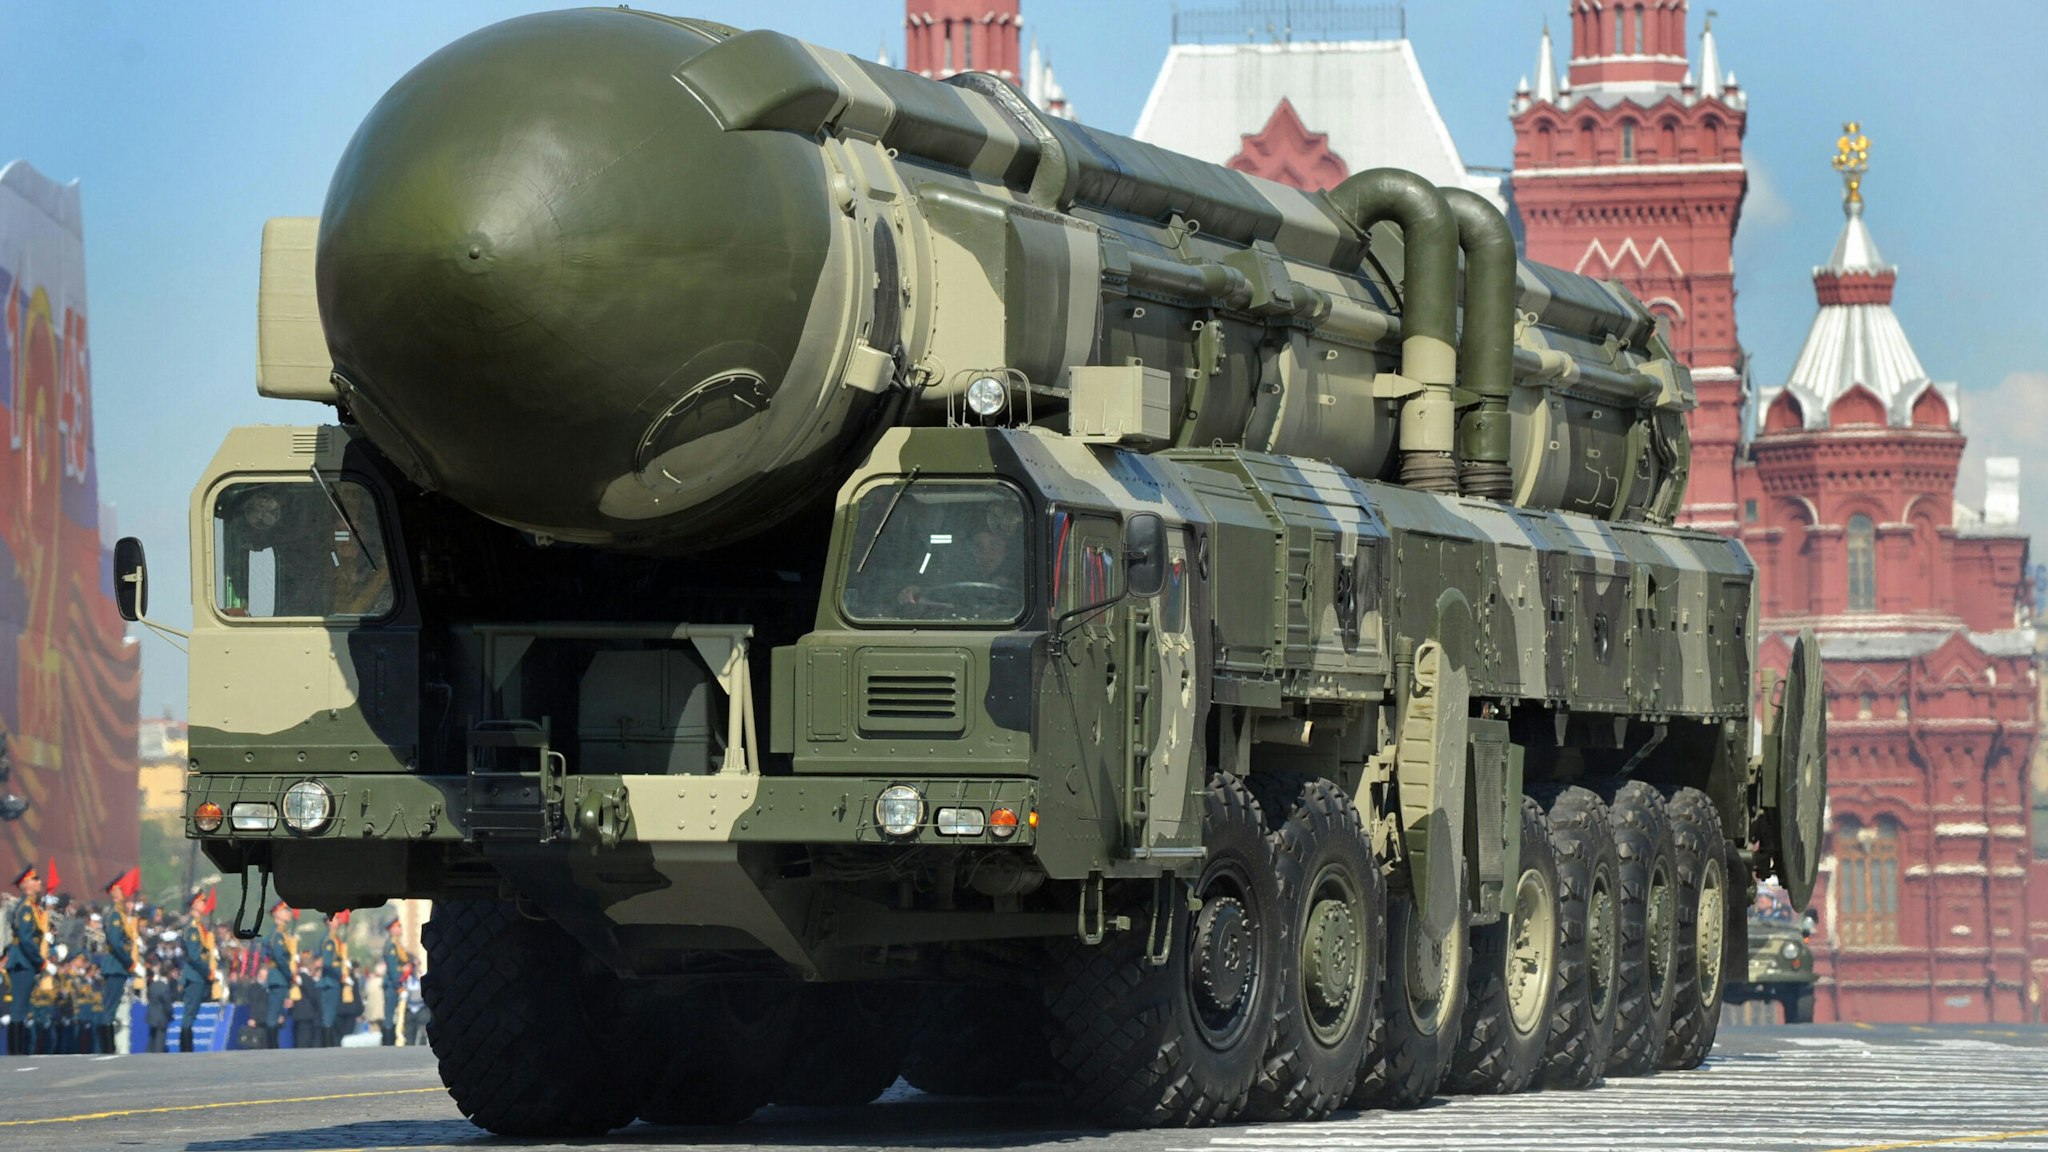 A Russian Topol-M intercontinental ballistic missile drives through Red Square during the nation's Victory Day parade in Moscow on May 9, 2009 in commemoration of the end of WWII. Russia sternly warned its foes not to dare make any aggression against the country, as it put on a Soviet-style show of military might in Red Square including nuclear capable missiles.